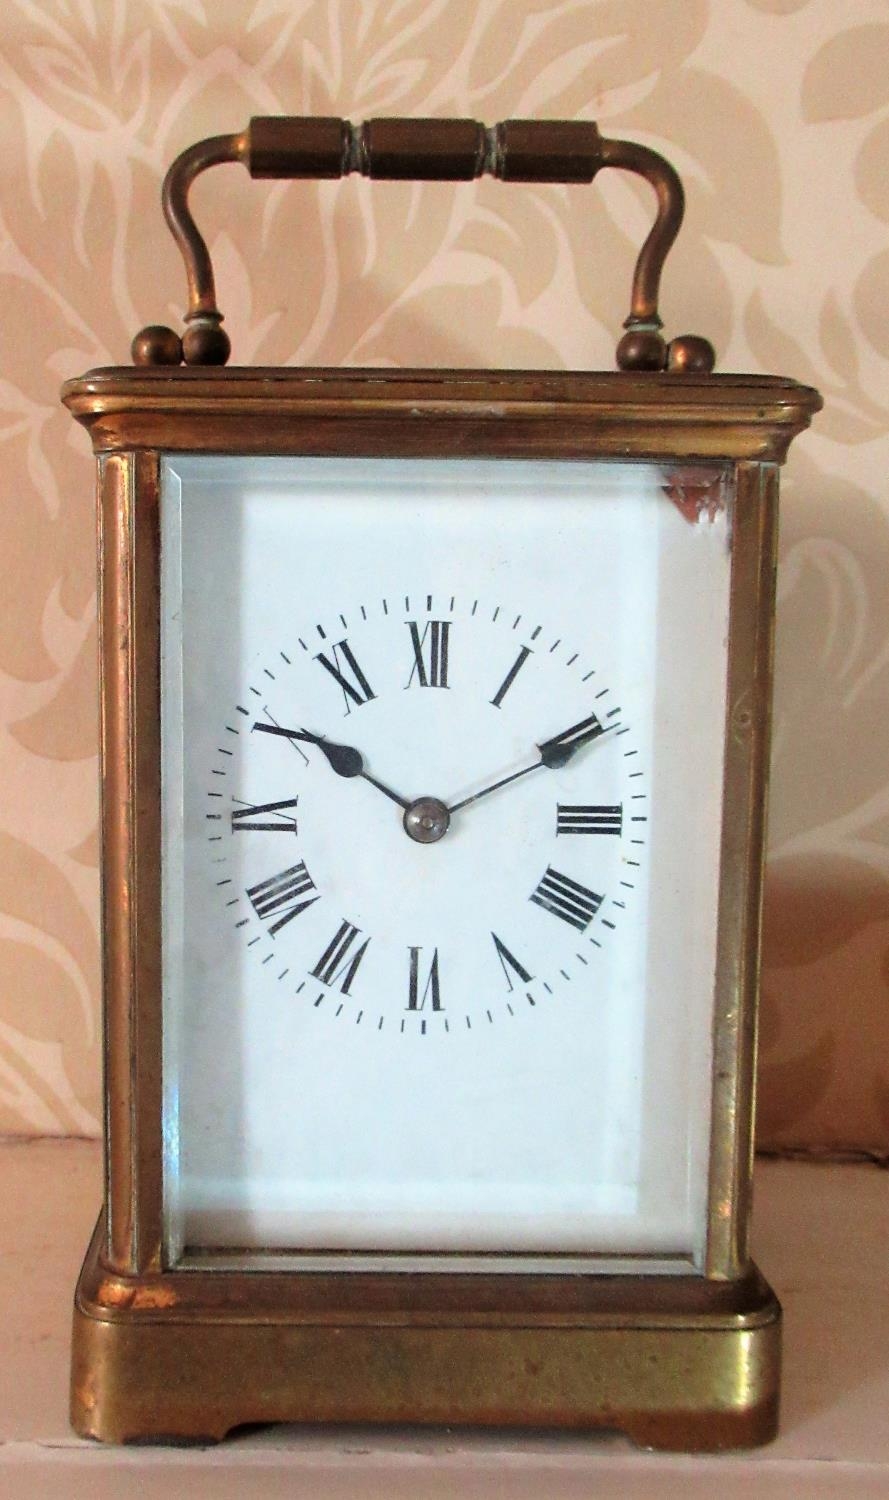 C20th French brass carriage clock, white enamel Roman dial in four bevel glass case, twin train